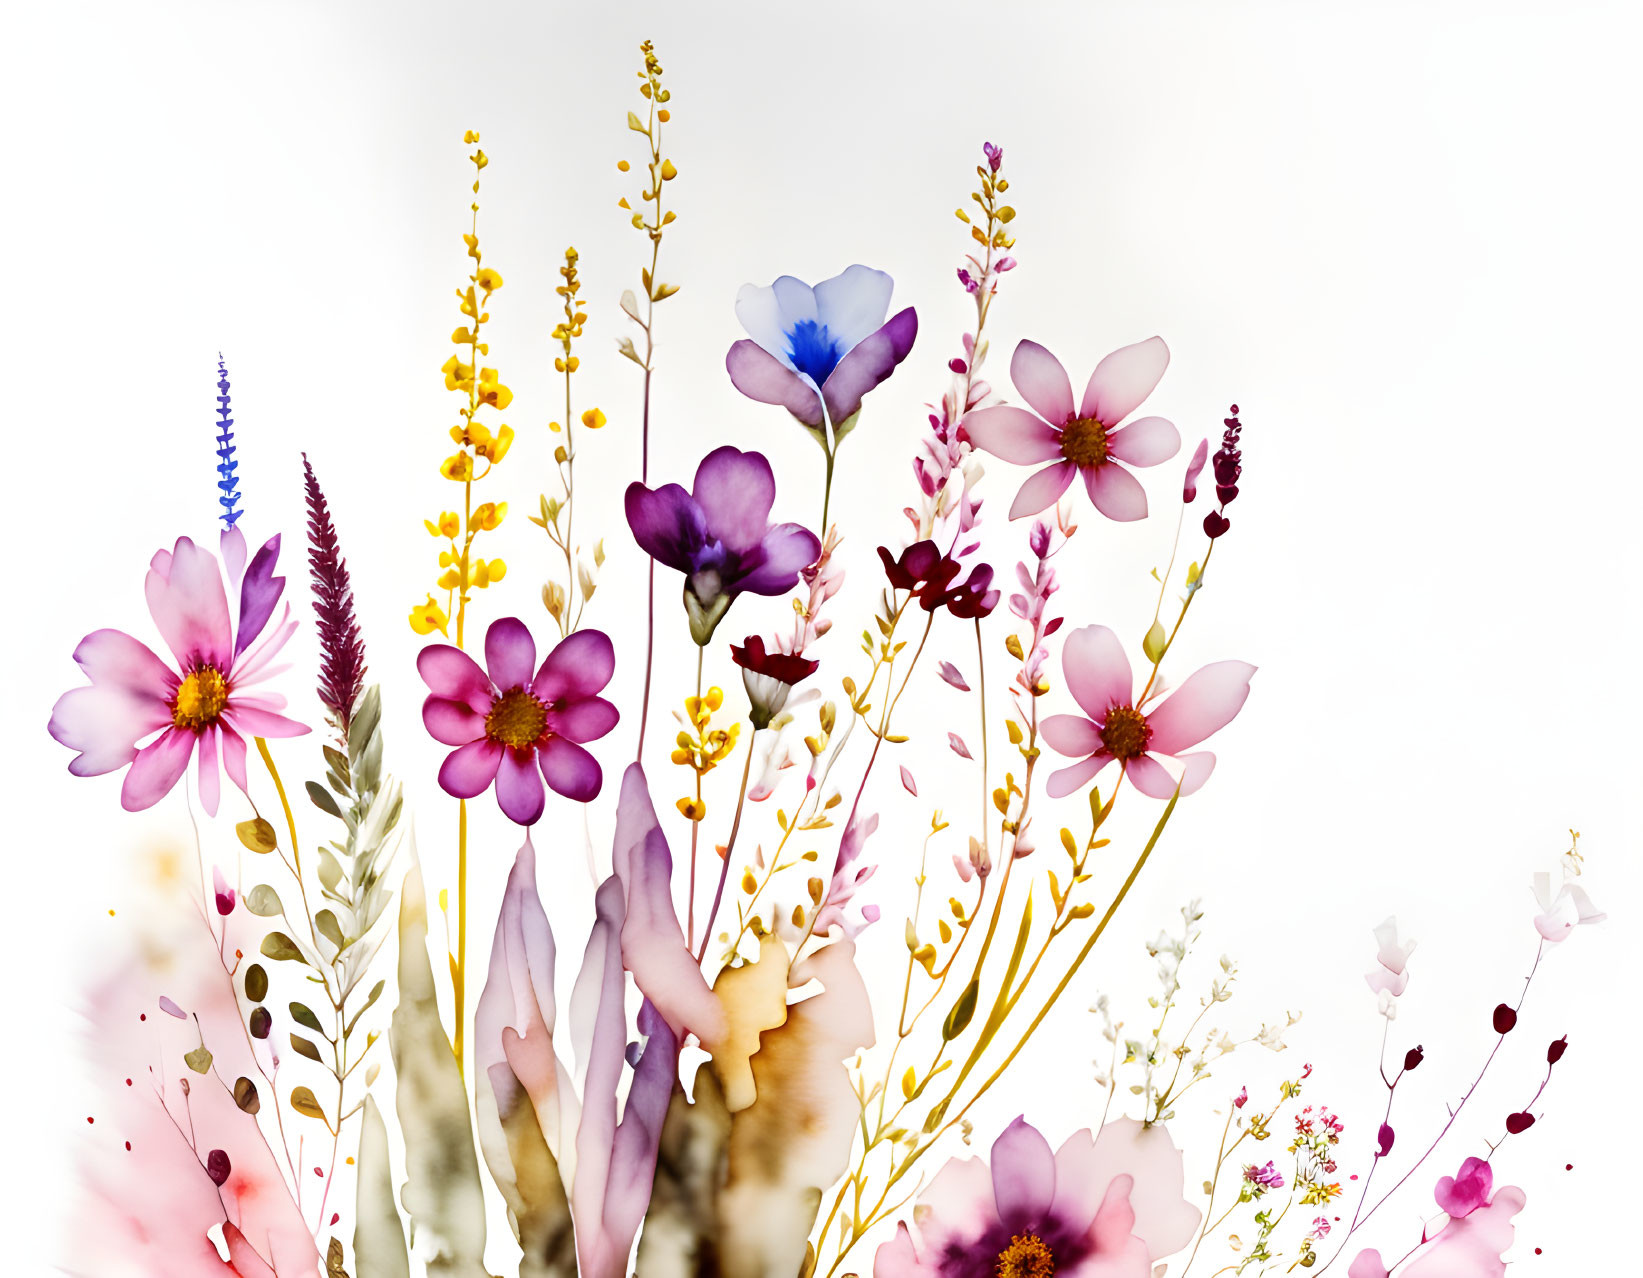 Colorful Watercolor Flowers in Pink, Purple, Blue, and Yellow on White Background